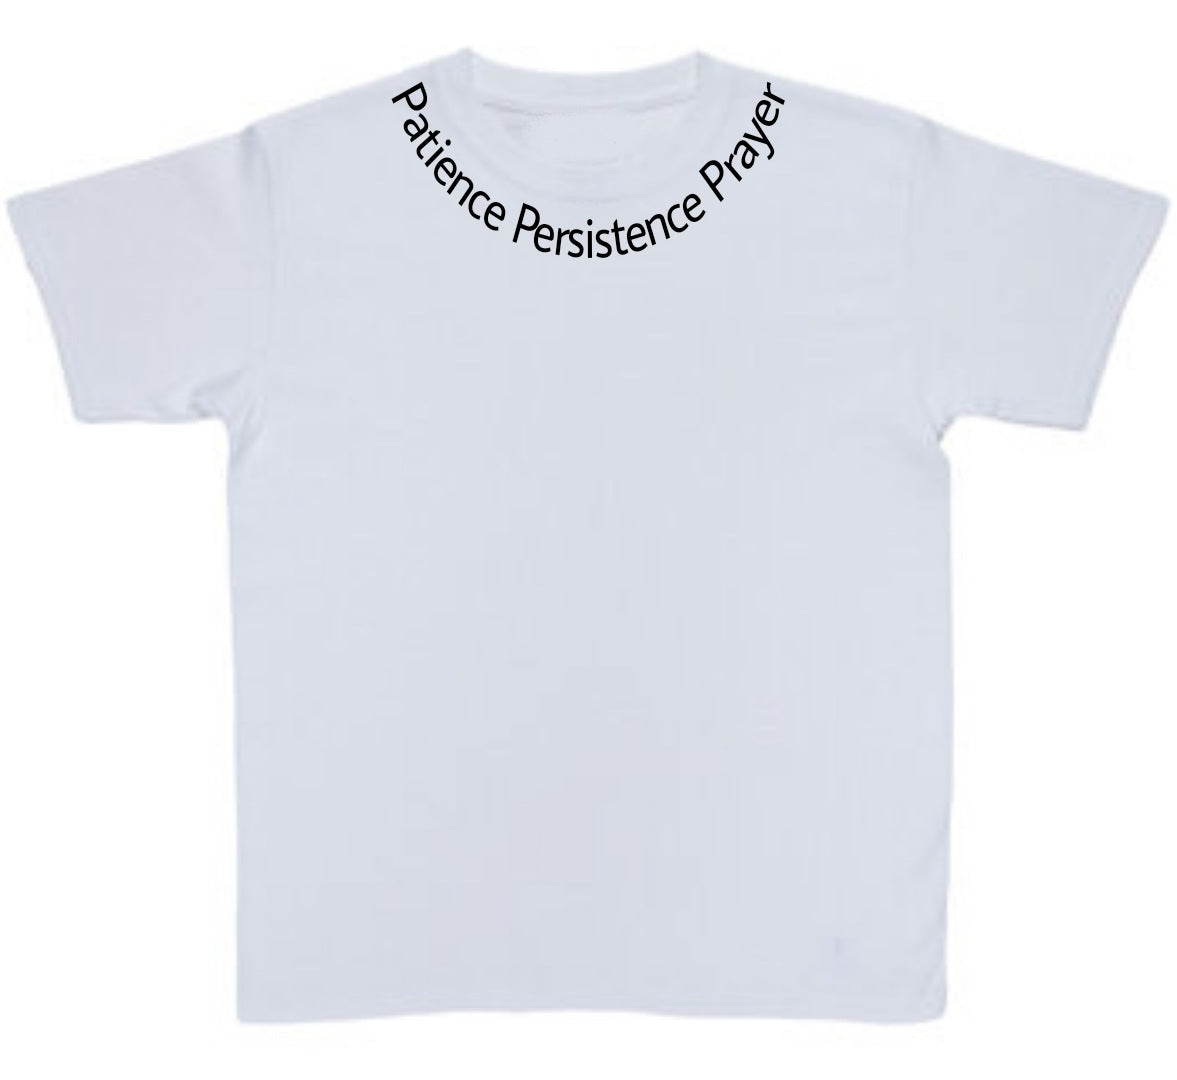 "Patience, Persistence, and Prayer" Toddler Tee